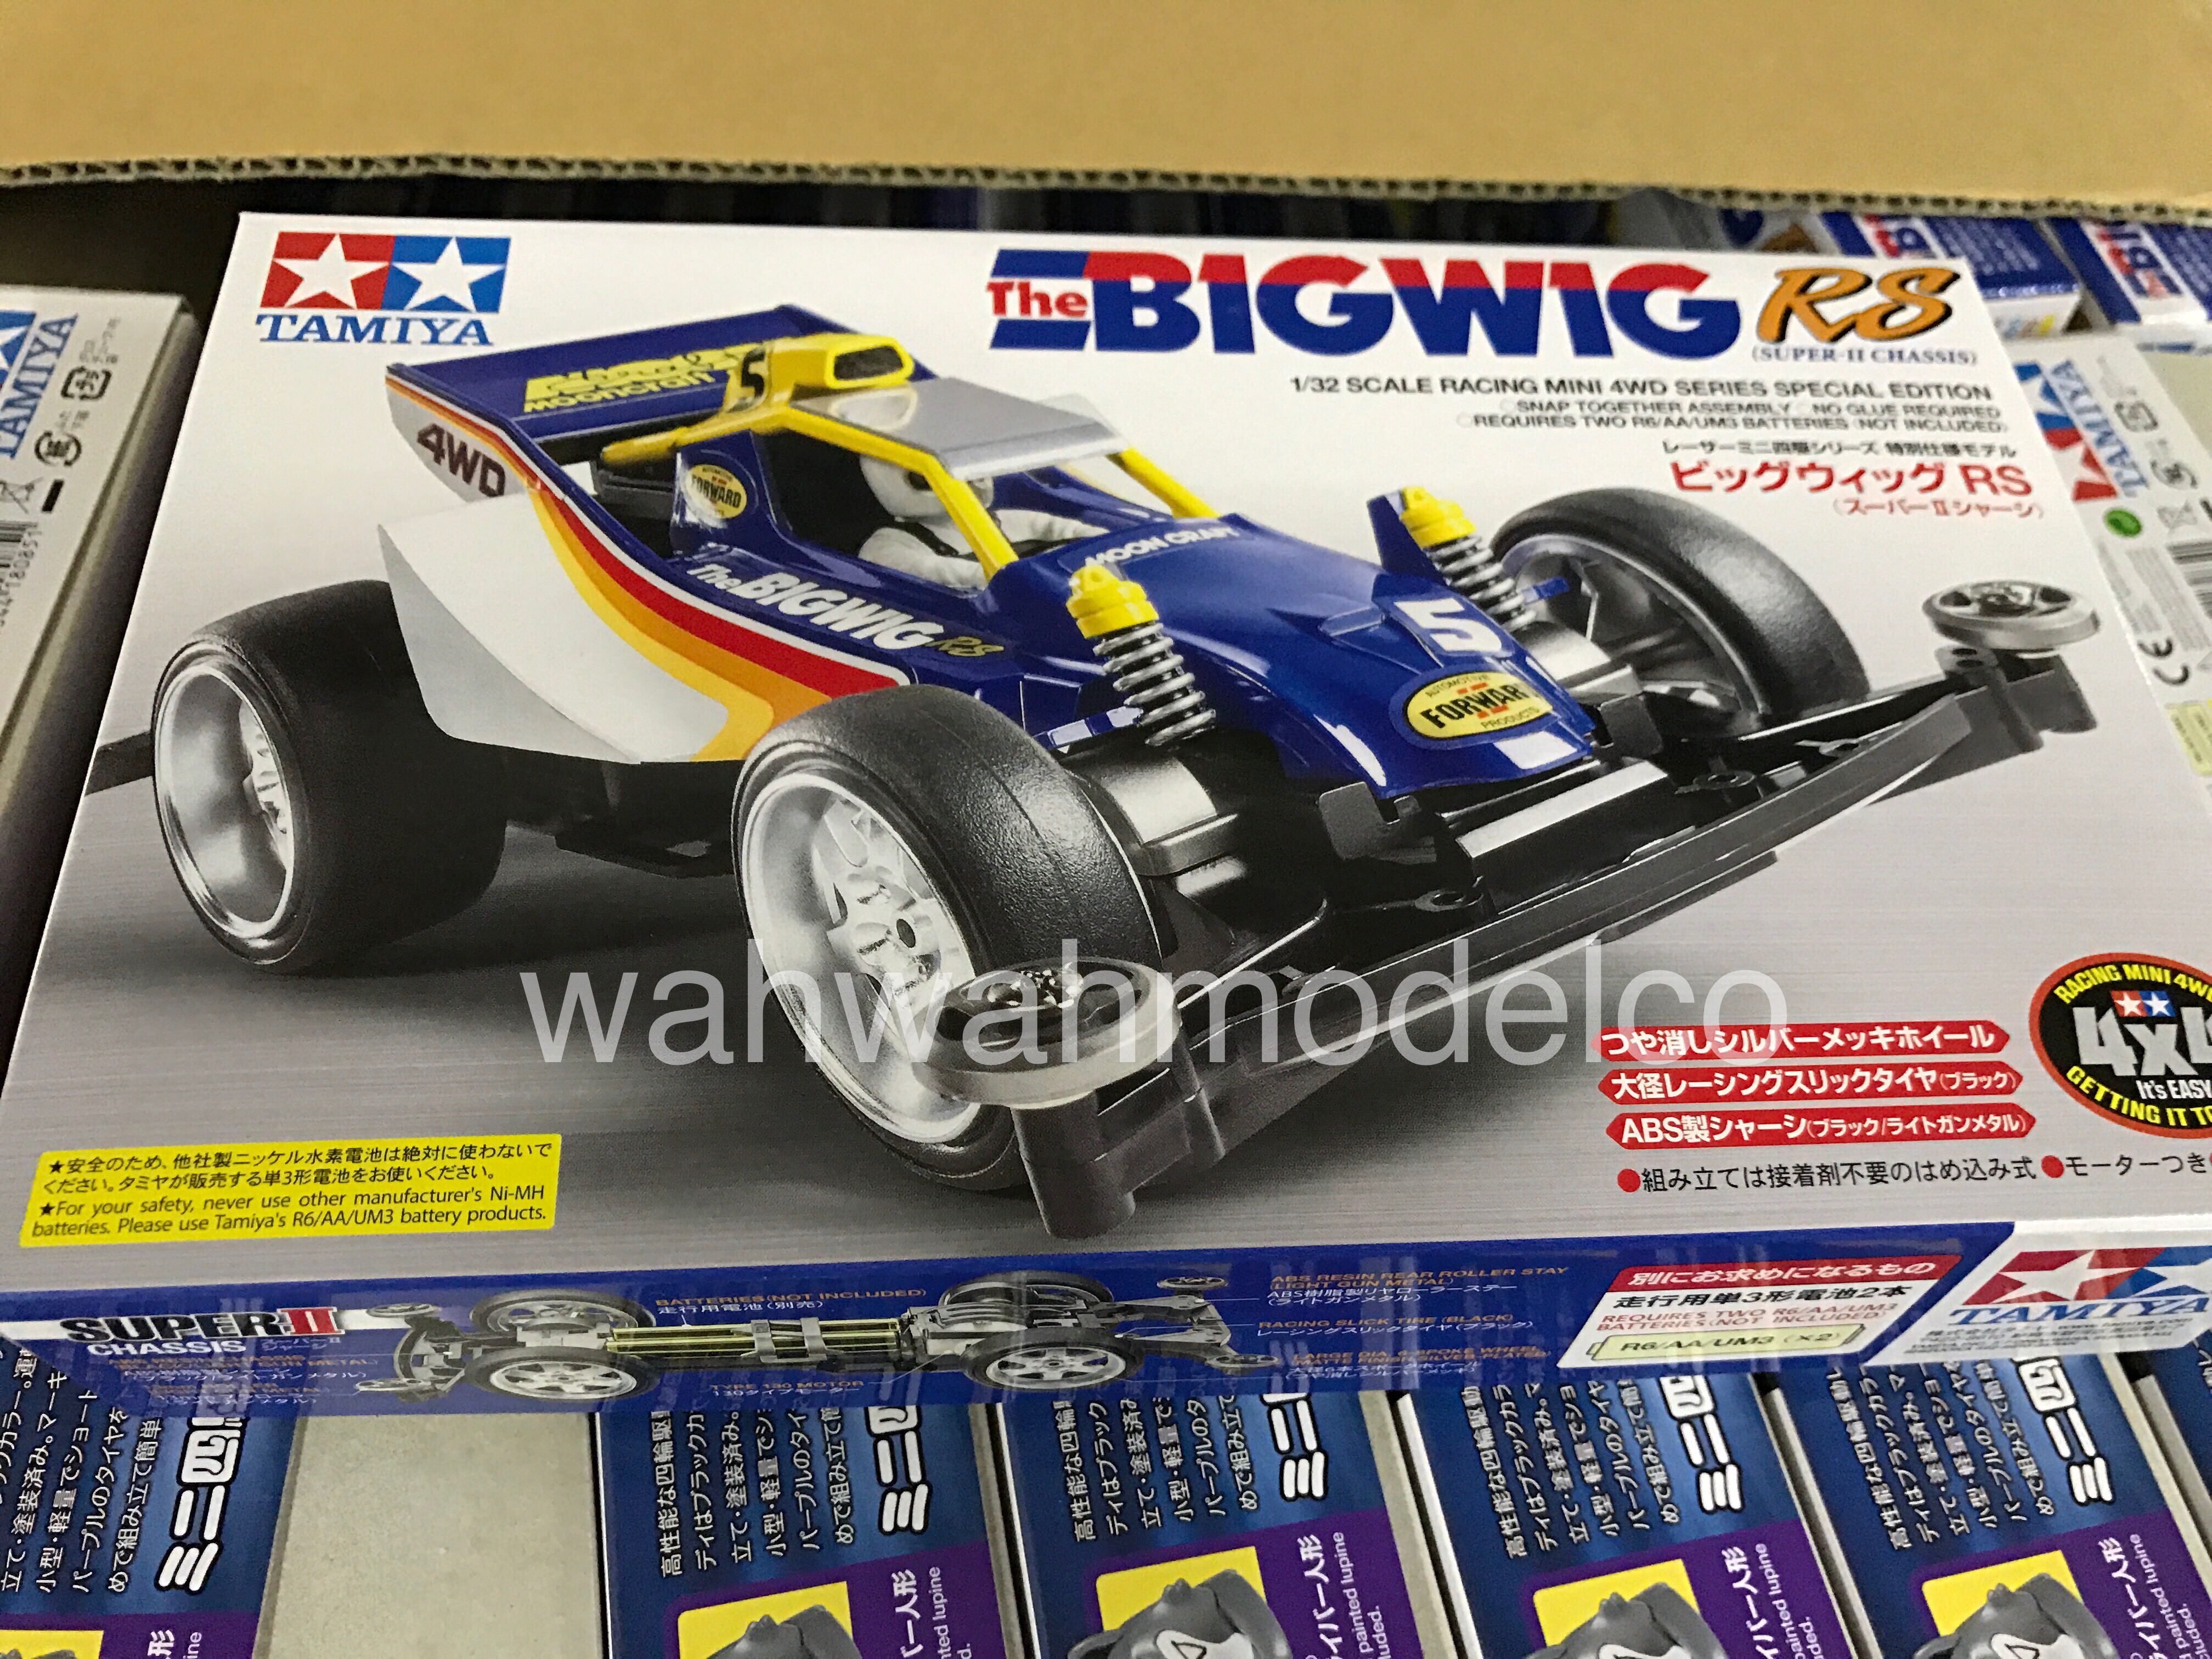 Tamiya 18090 1/32 Scale Mini 4wd Car Kit Super II Chassis Jr Cat Racer for sale online 